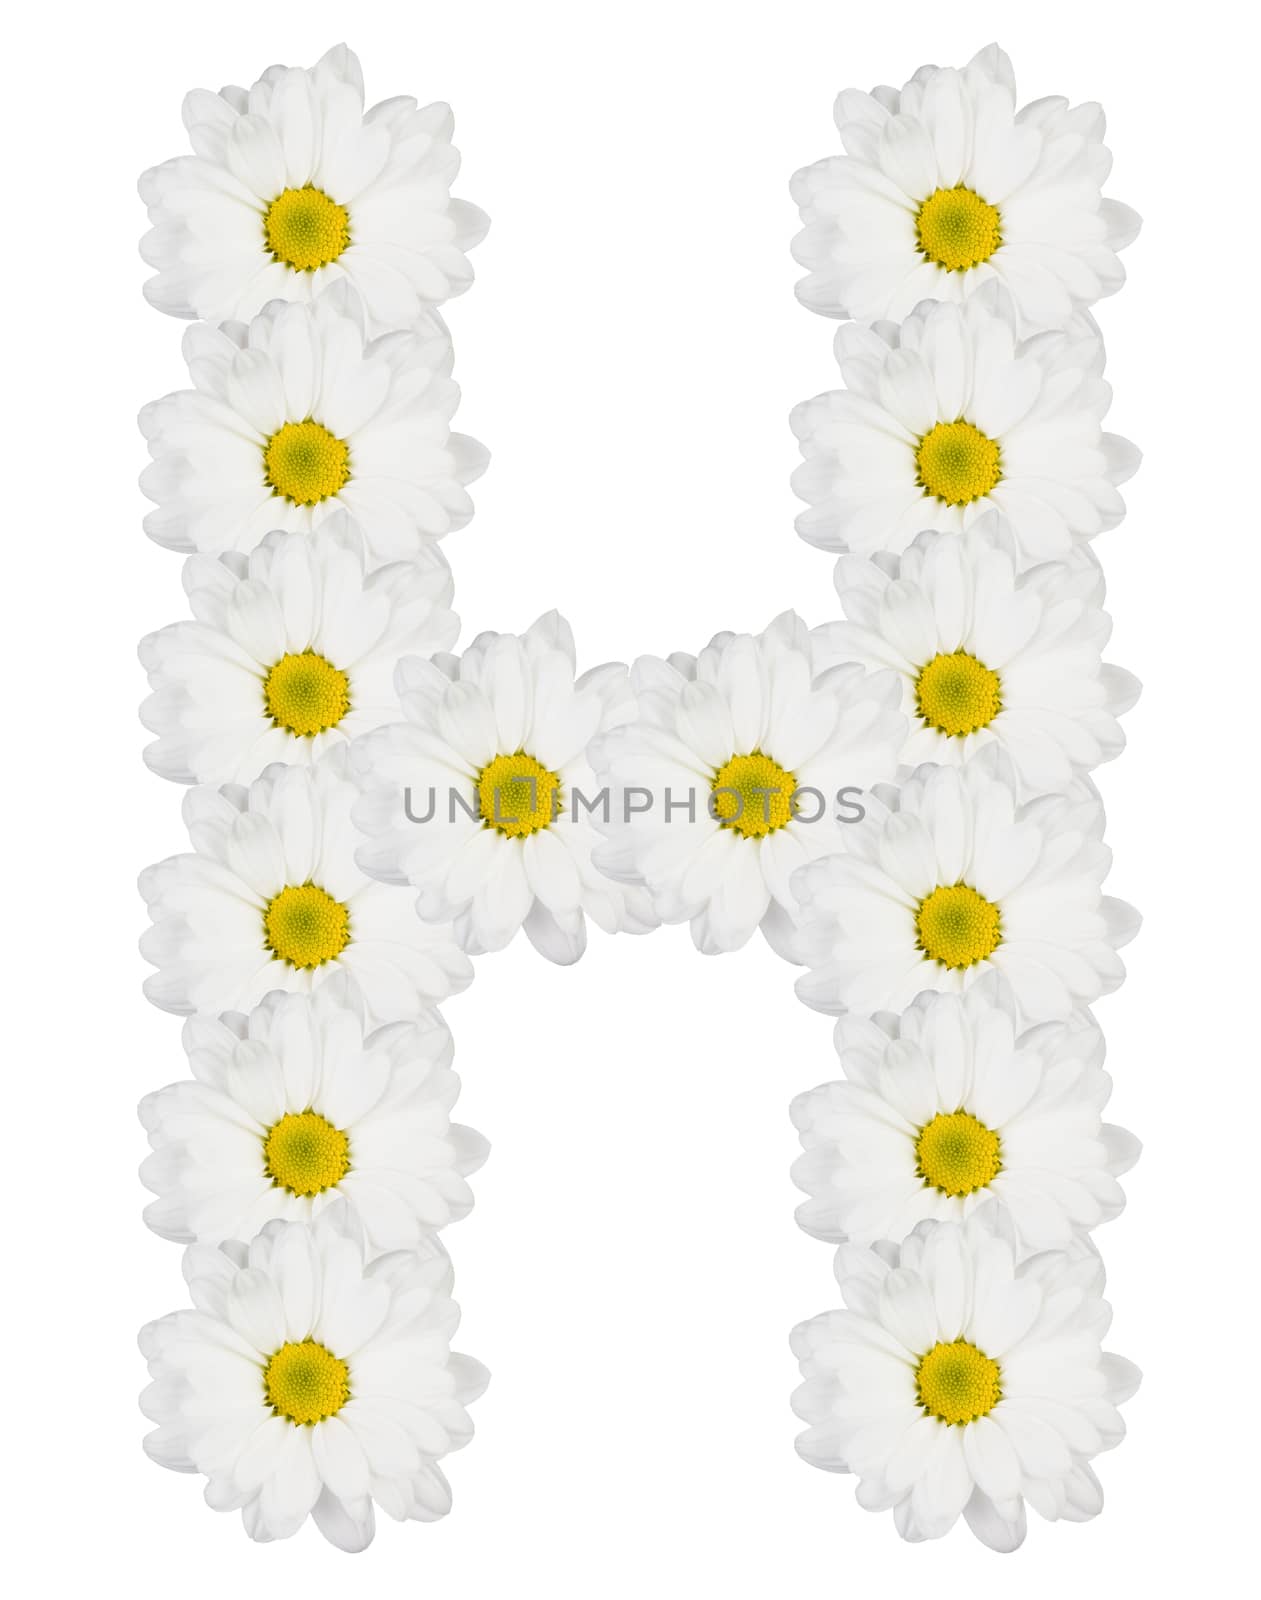 Letter H made from white flowers